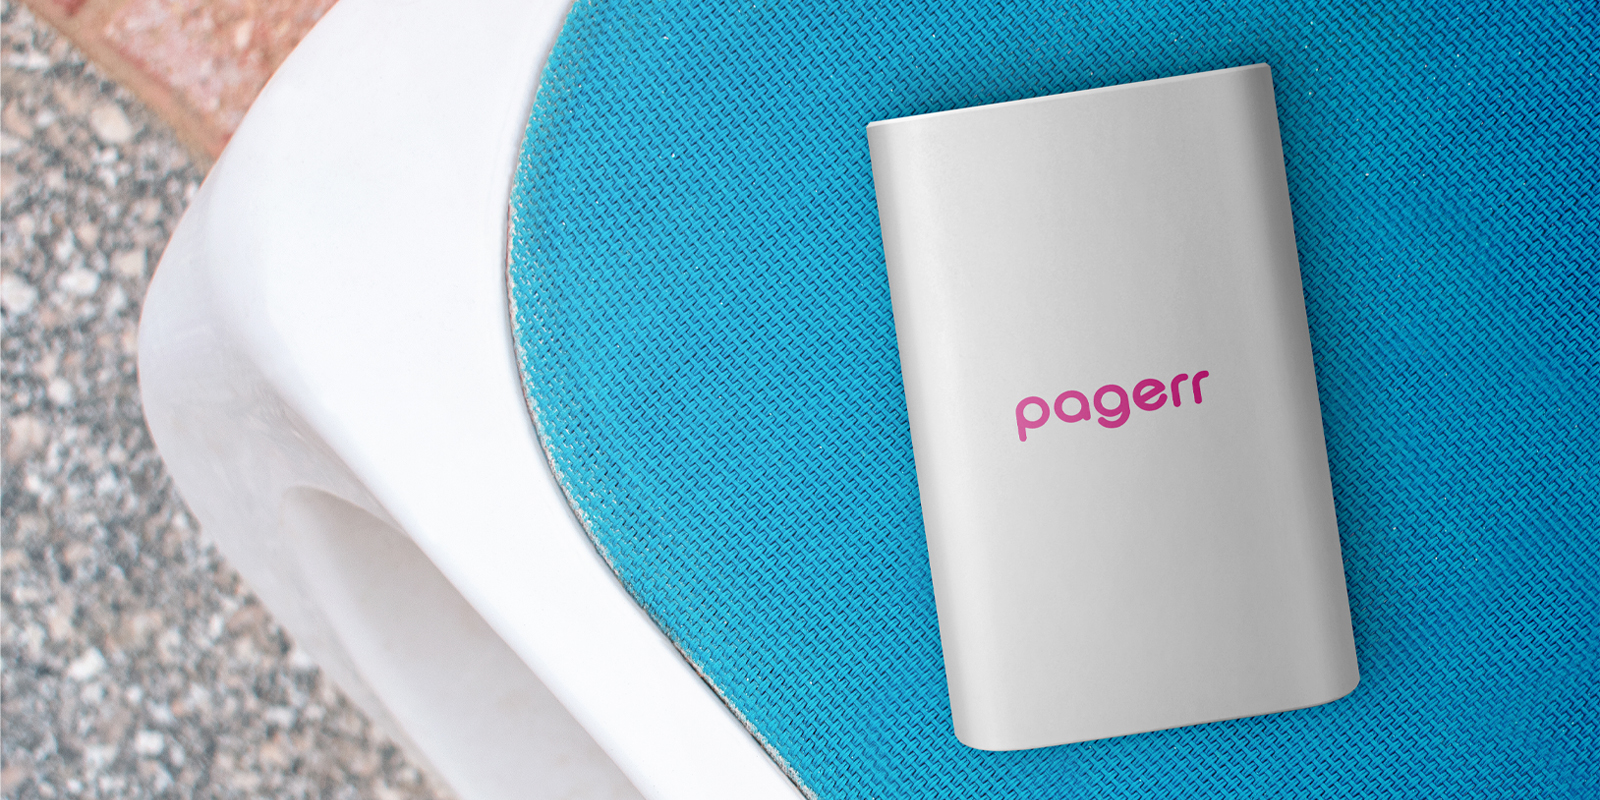 Chargers & power banks in Rockhampton - Print with Pagerr